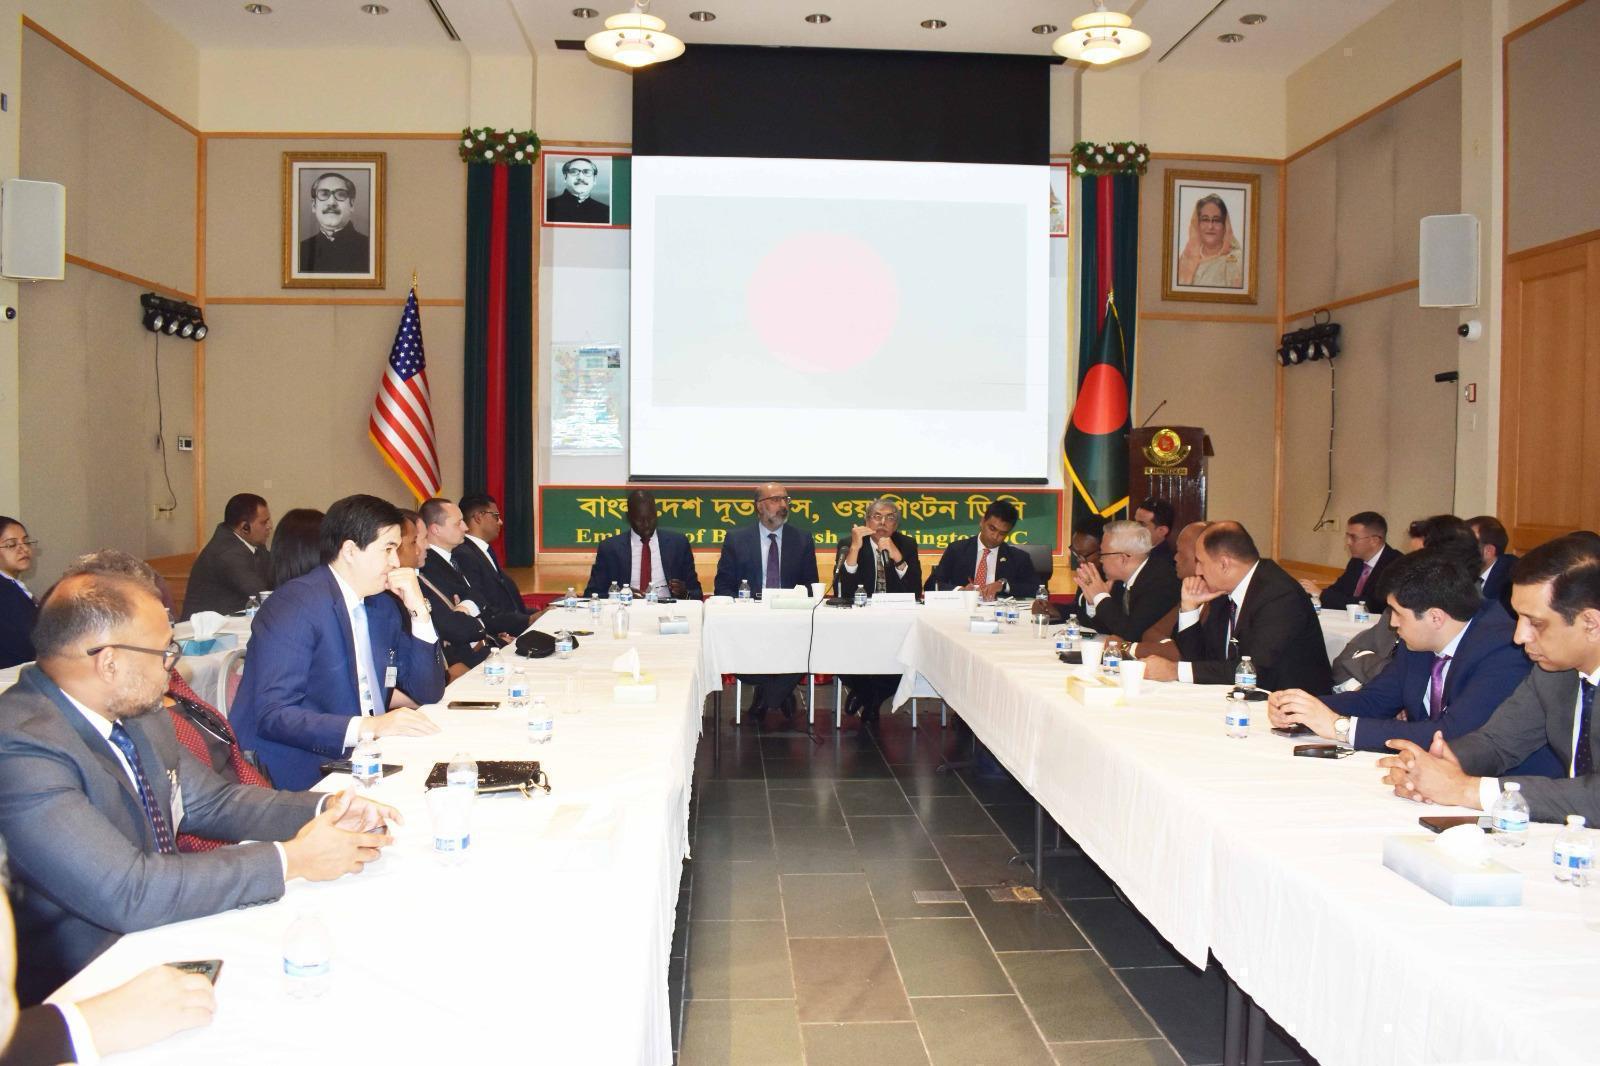 Dhaka urges coordinated efforts by all countries to address global challenges of terrorism